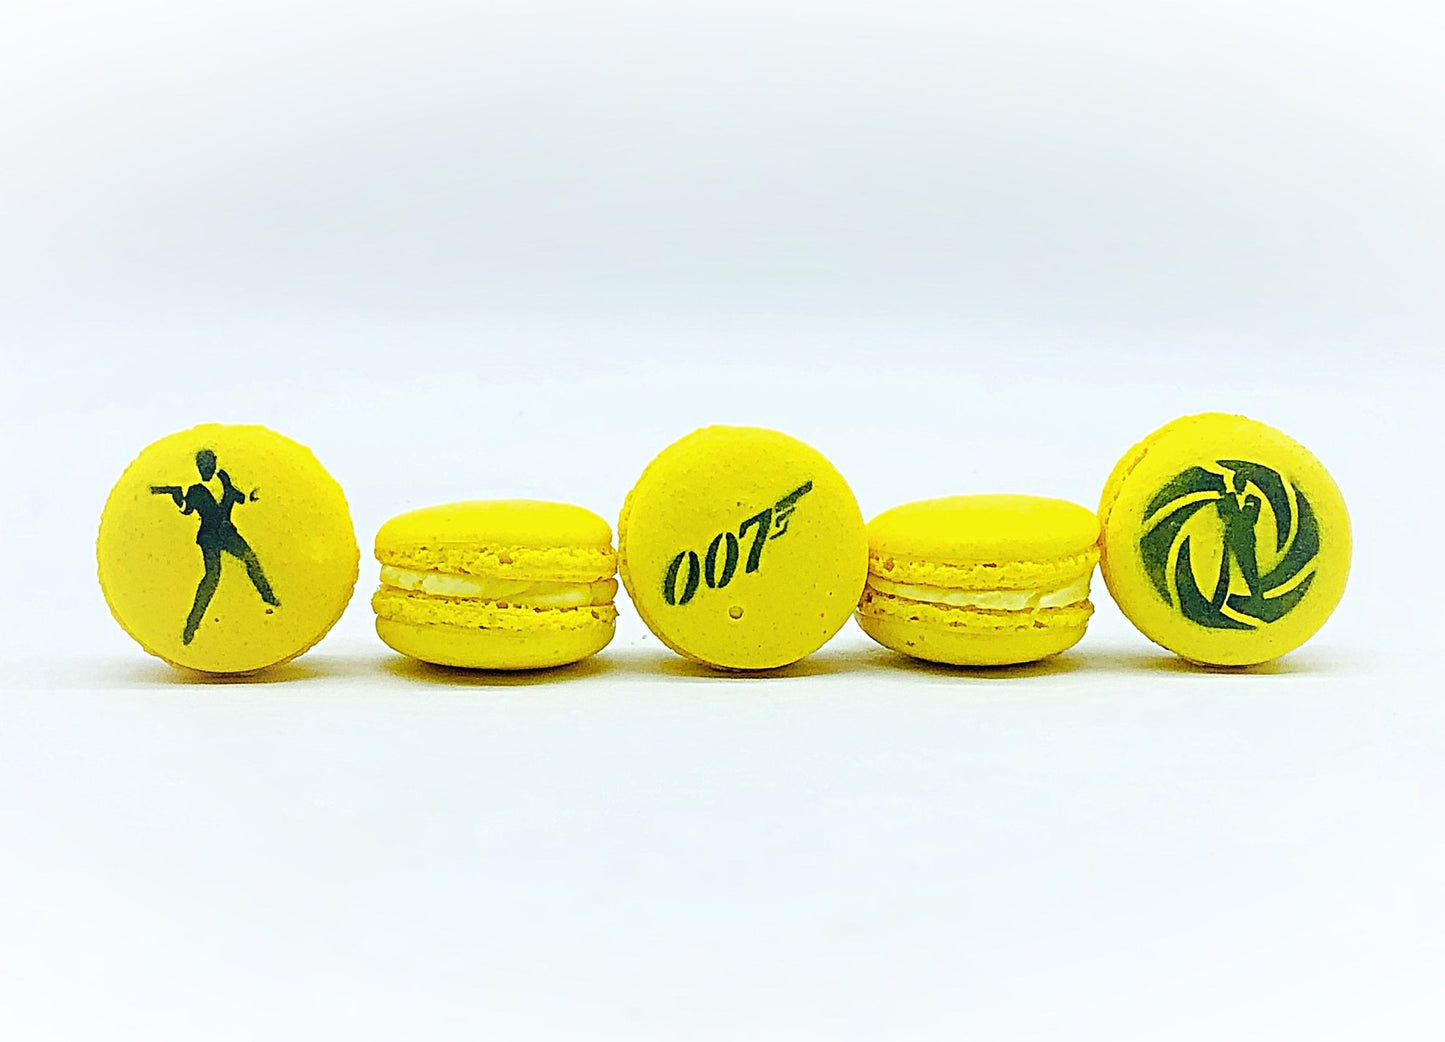 French Macaron Tribute to James Bond Movie | Available in 6 or 12 Pack - Macaron Centrale6 pack